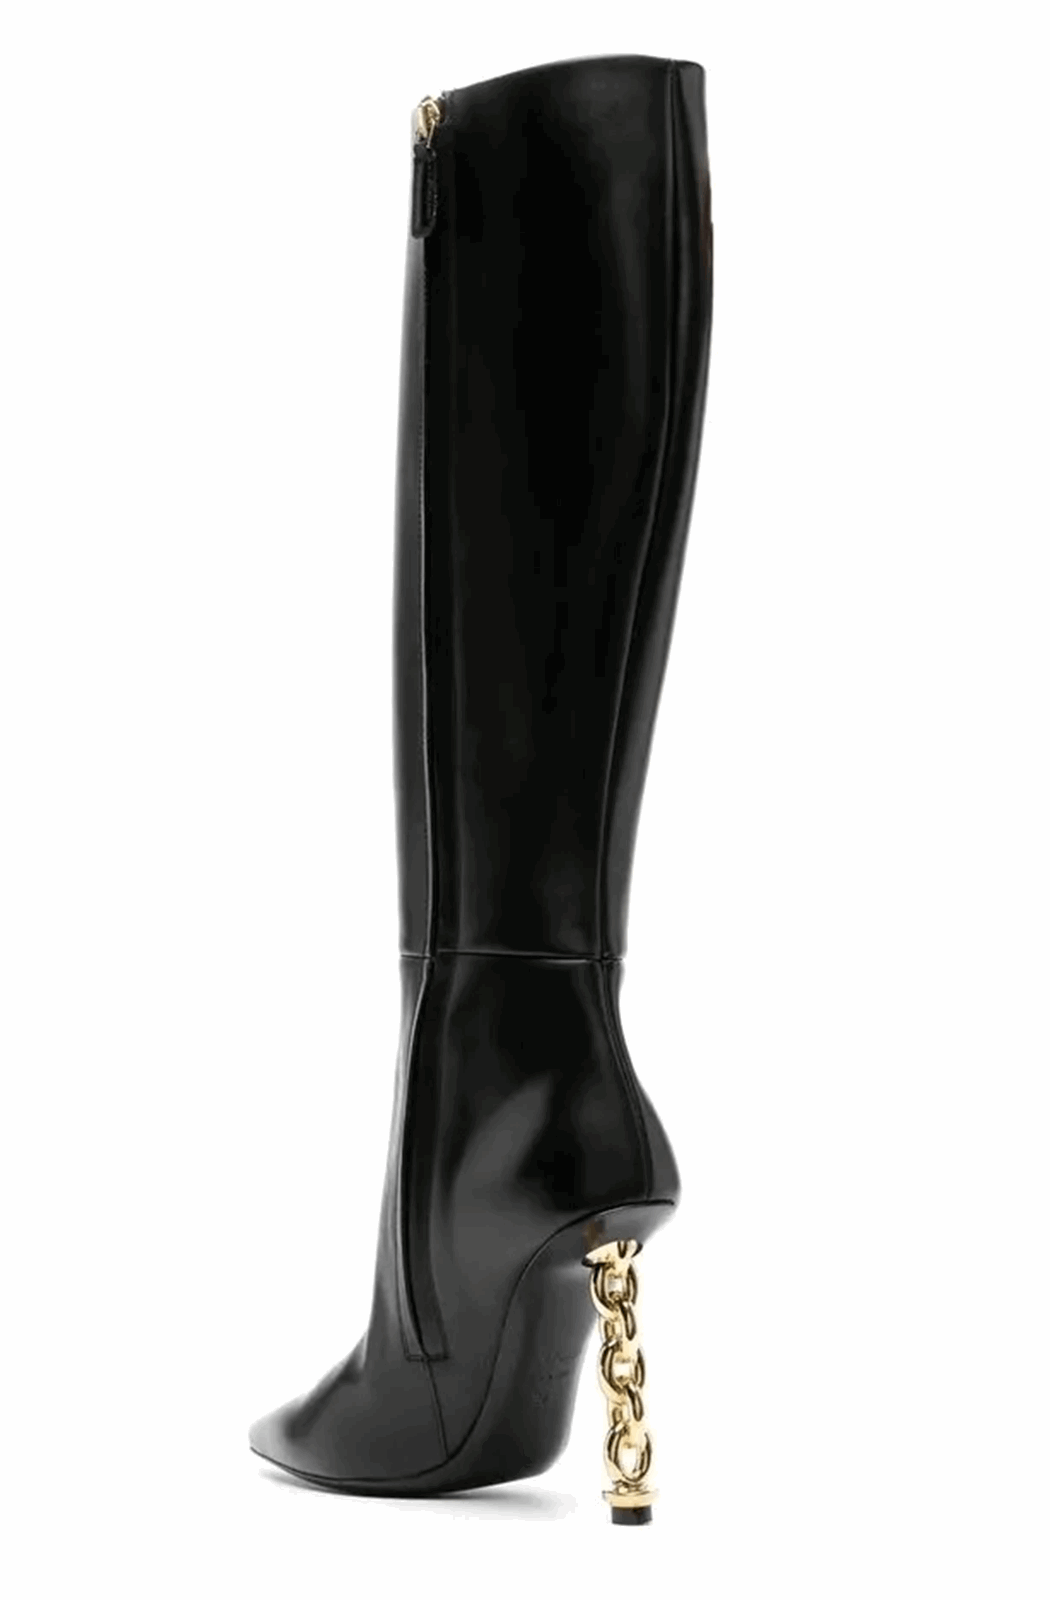 Black knee length boots with chain heels